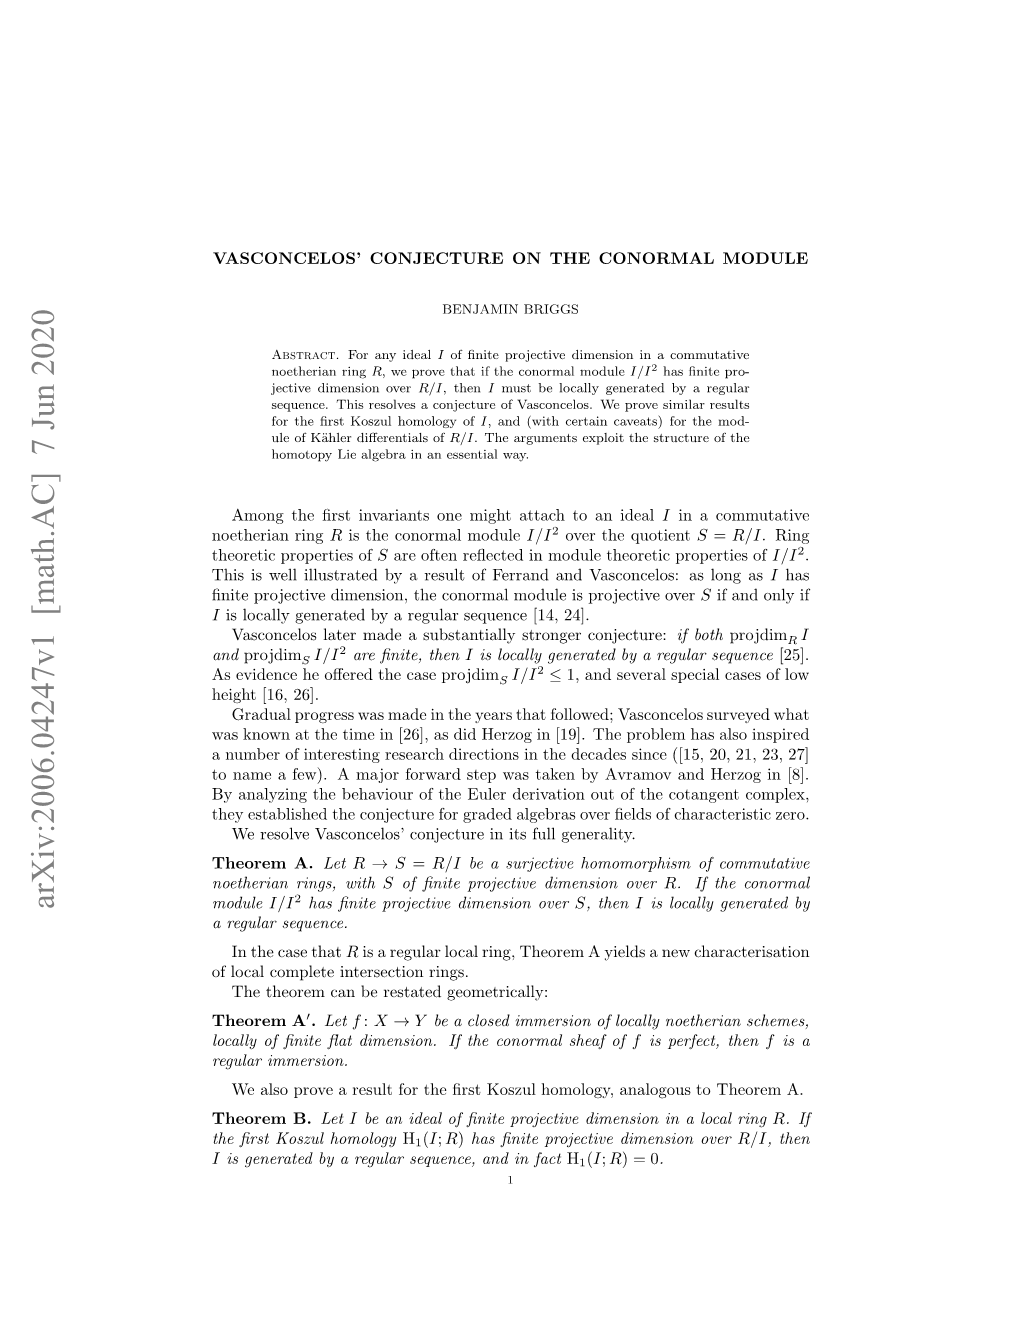 Vasconcelos' Conjecture on the Conormal Module